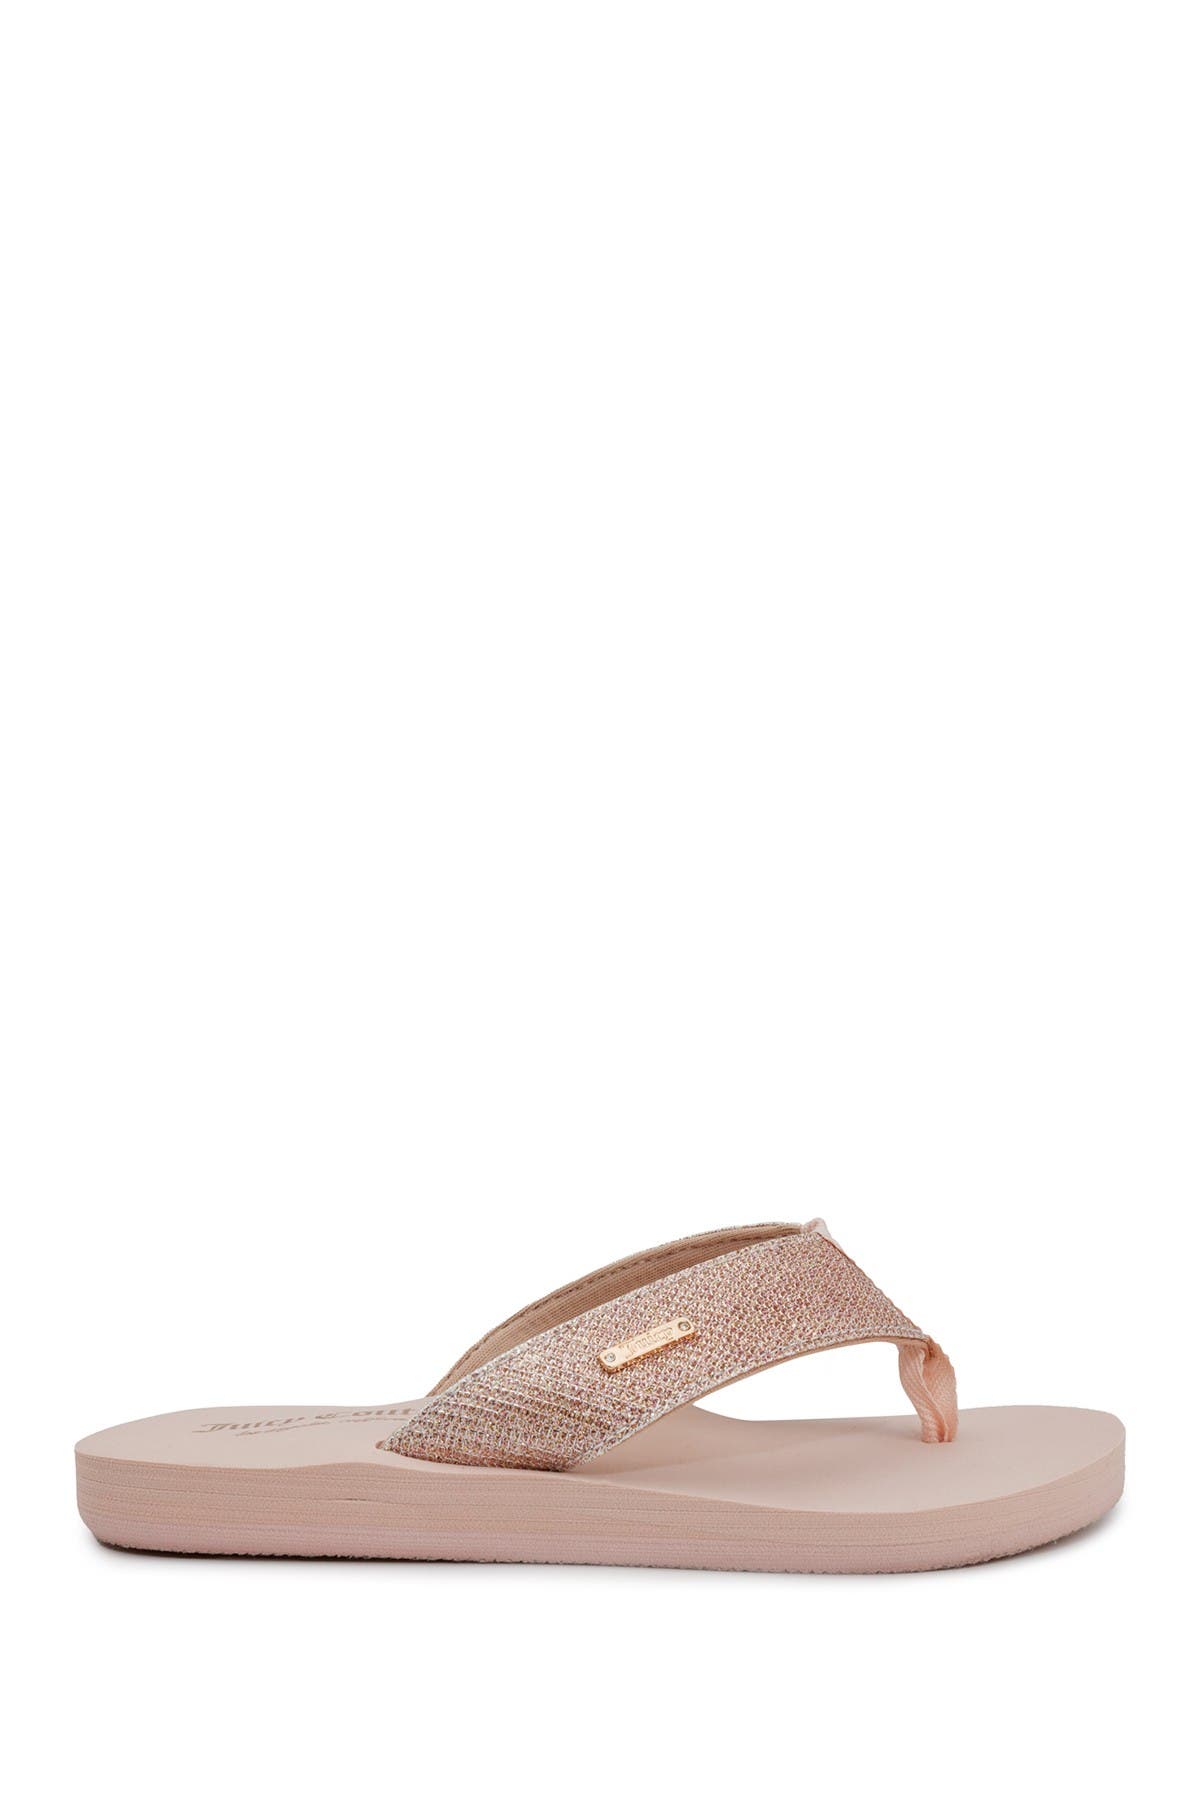 Juicy Couture Smirk Thong Sandal In Q-rose Gold Glitter